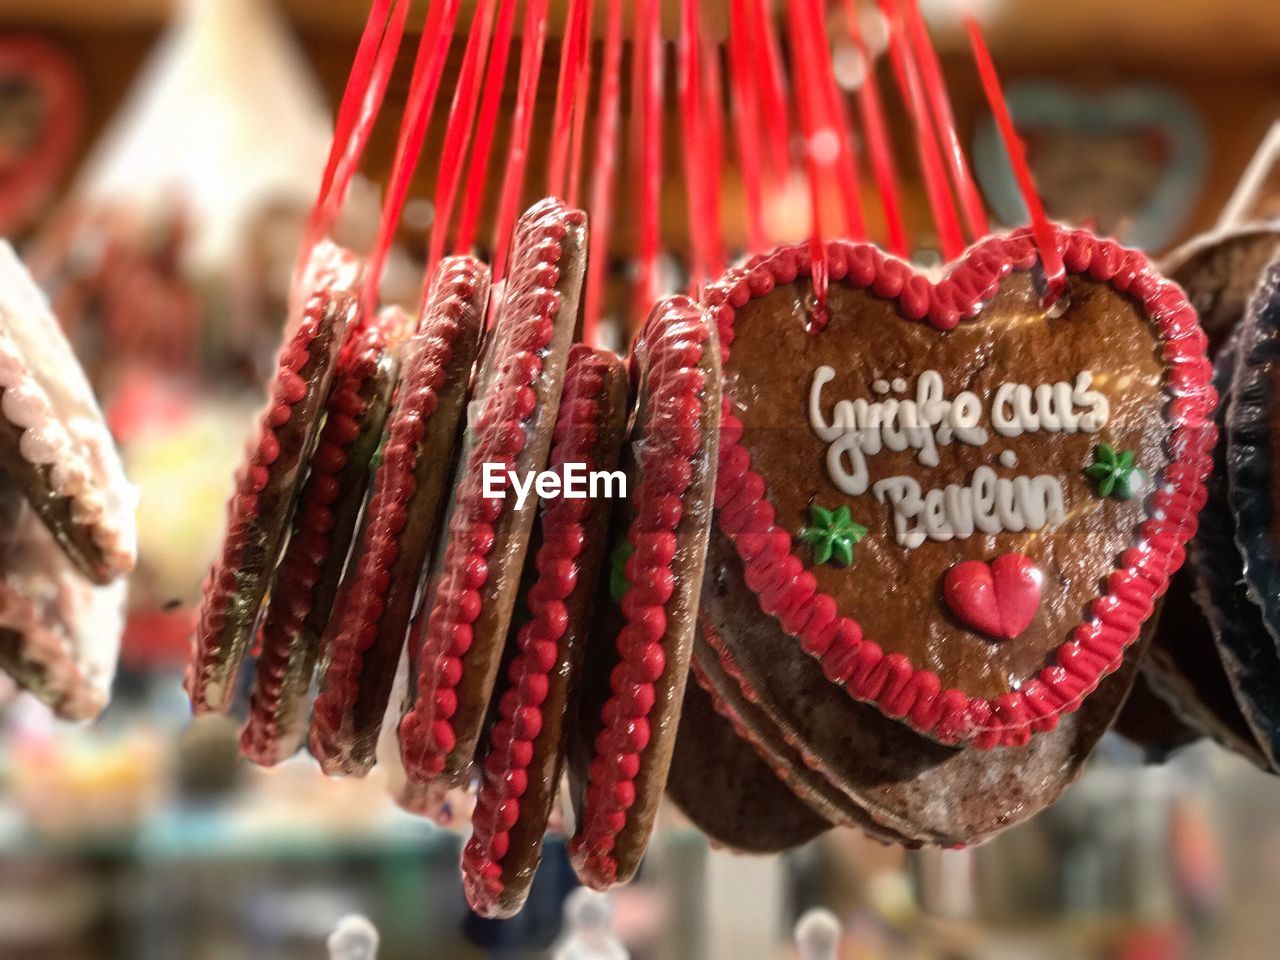 CLOSE-UP OF HEART SHAPE MADE OF CAKE HANGING ON DISPLAY